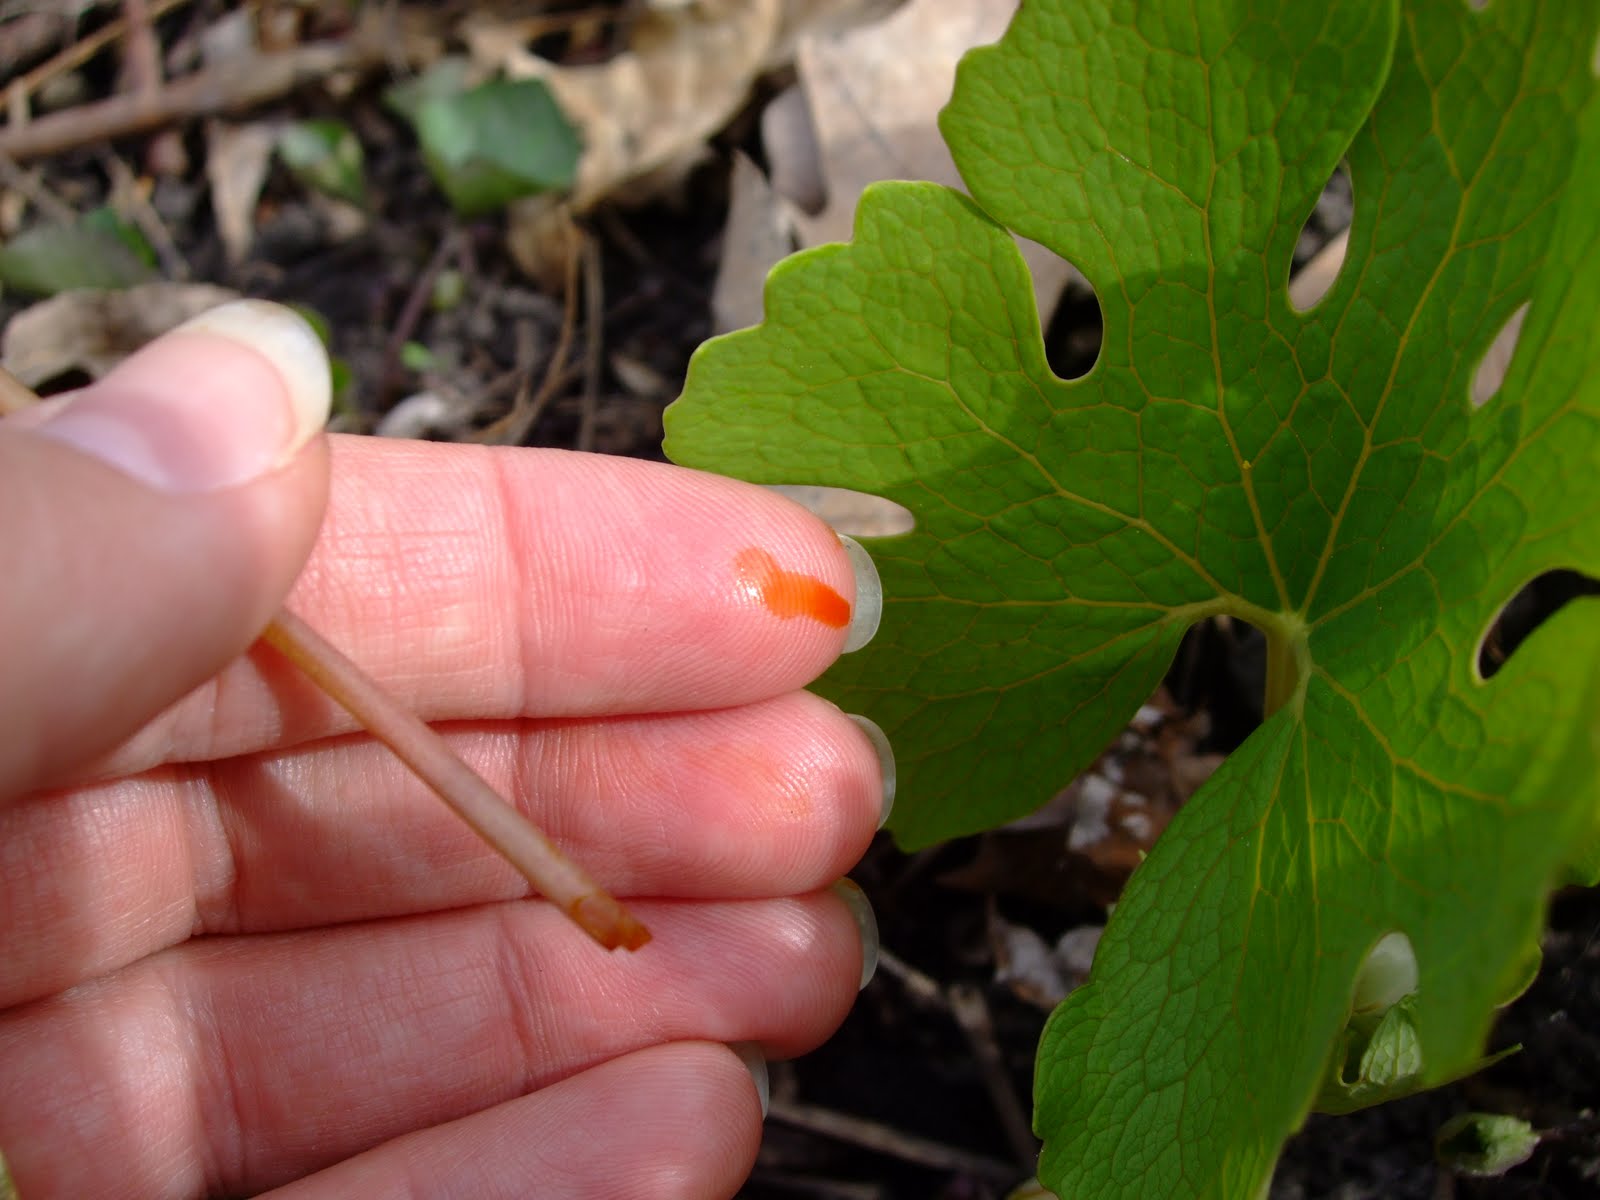 bloodroot plants plant talk yes damage sis didn law above want pic google search